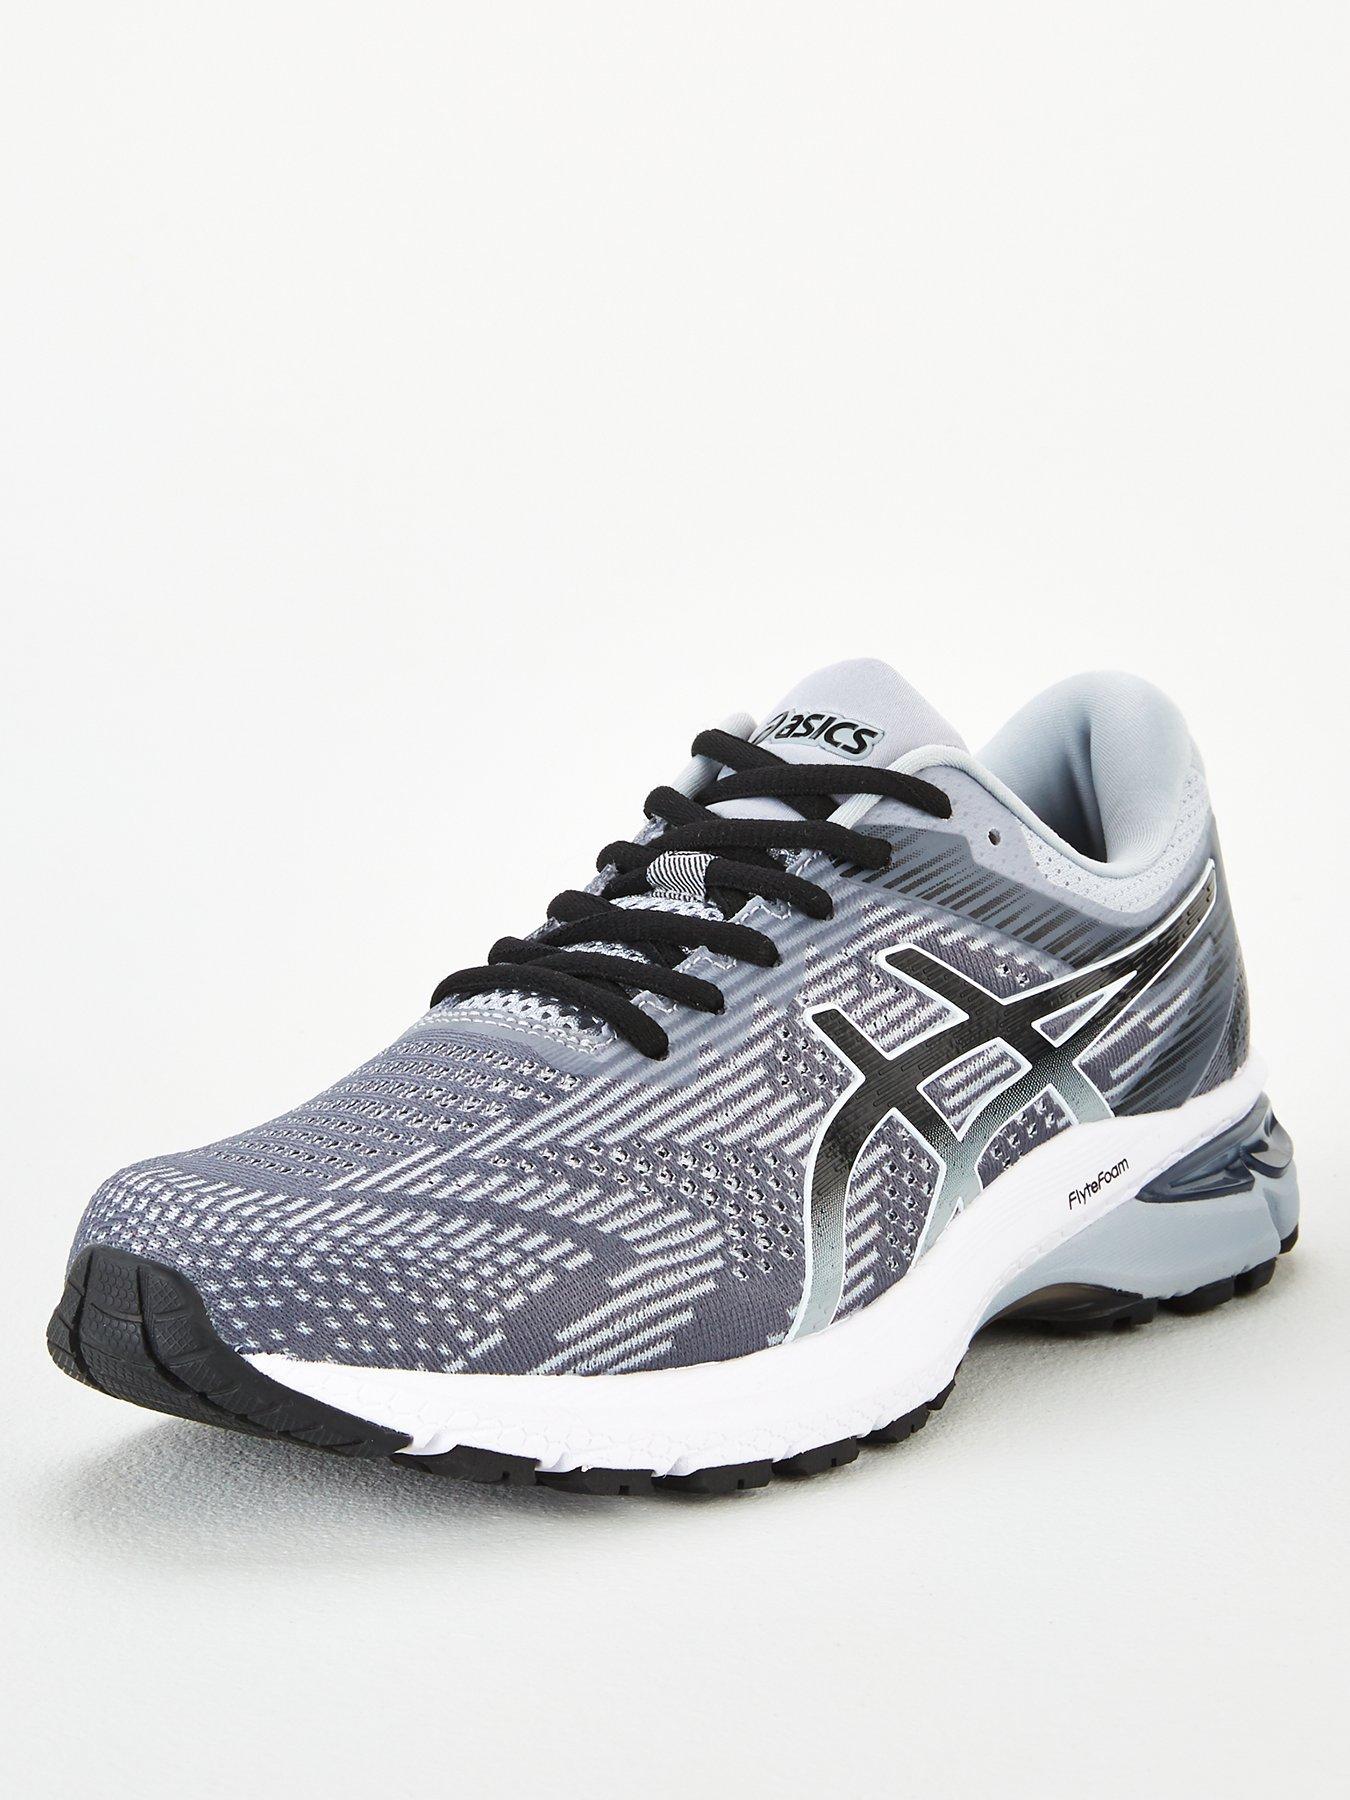 asics gt 2000 trainers